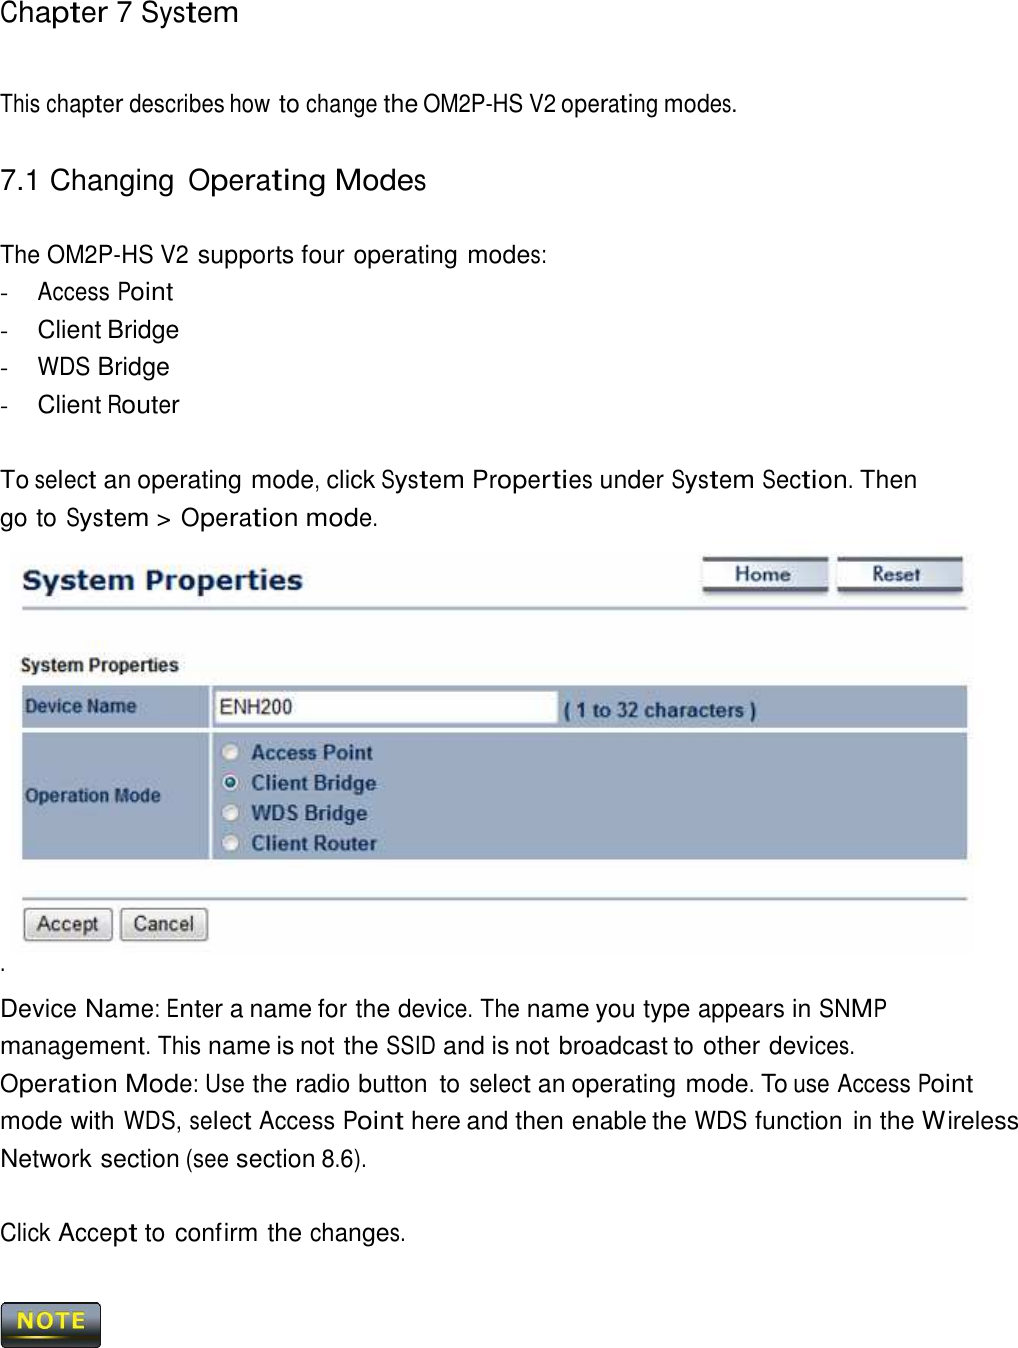 Chapter 7 System     This chapter describes how to change the OM2P-HS V2 operating modes.   7.1 Changing Operating Modes   The OM2P-HS V2 supports four operating modes: - Access Point - Client Bridge - WDS Bridge - Client Router   To select an operating mode, click System Properties under System Section. Then go to System &gt; Operation mode. .   Device Name: Enter a name for the device. The name you type appears in SNMP management. This name is not the SSID and is not broadcast to other devices.  Operation Mode: Use the radio button  to select an operating mode. To use Access Point mode with WDS, select Access Point here and then enable the WDS function in the Wireless Network section (see section 8.6).   Click Accept to confirm the changes.     